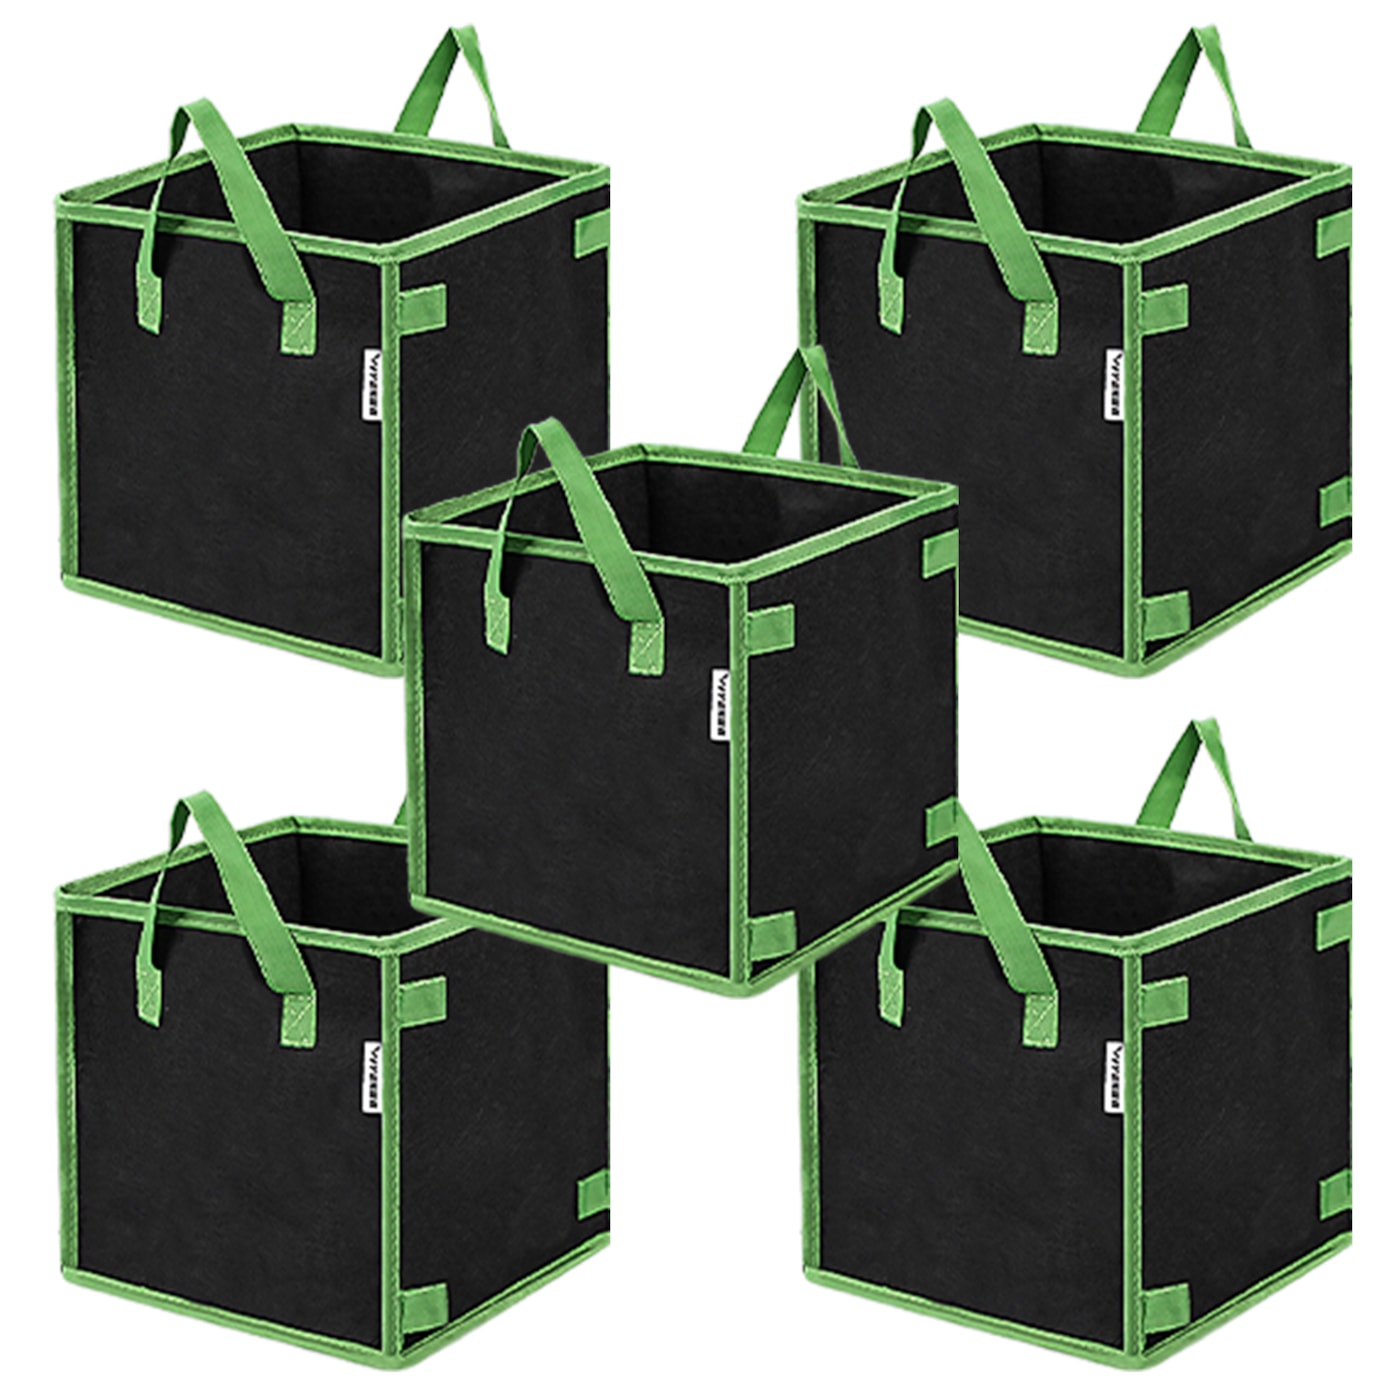 VIVOSUN 7 Gallon Square Grow Bags 5-Pack Brown Thickened Nonwoven Fabric Pots with Handles